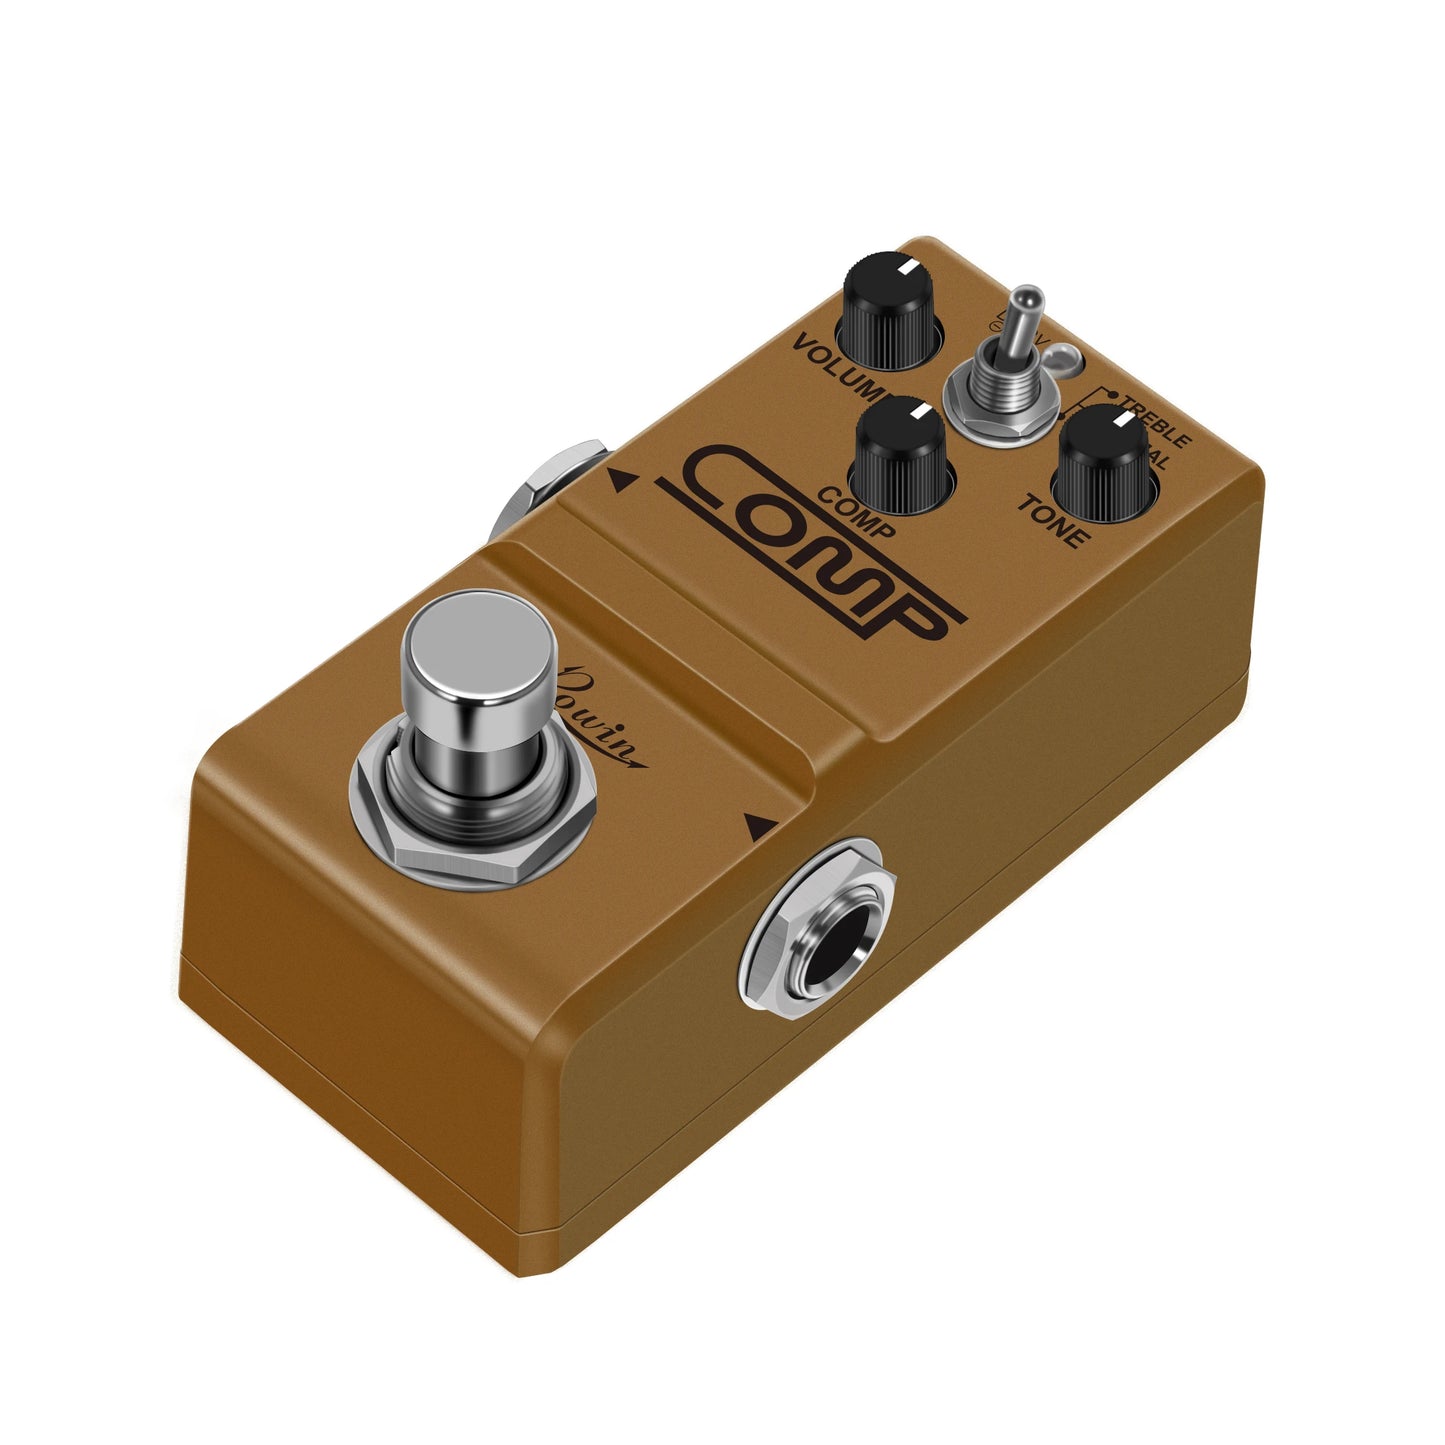 Enhance Your Guitar Sound with Rowin Compressor Pedal - LN-333